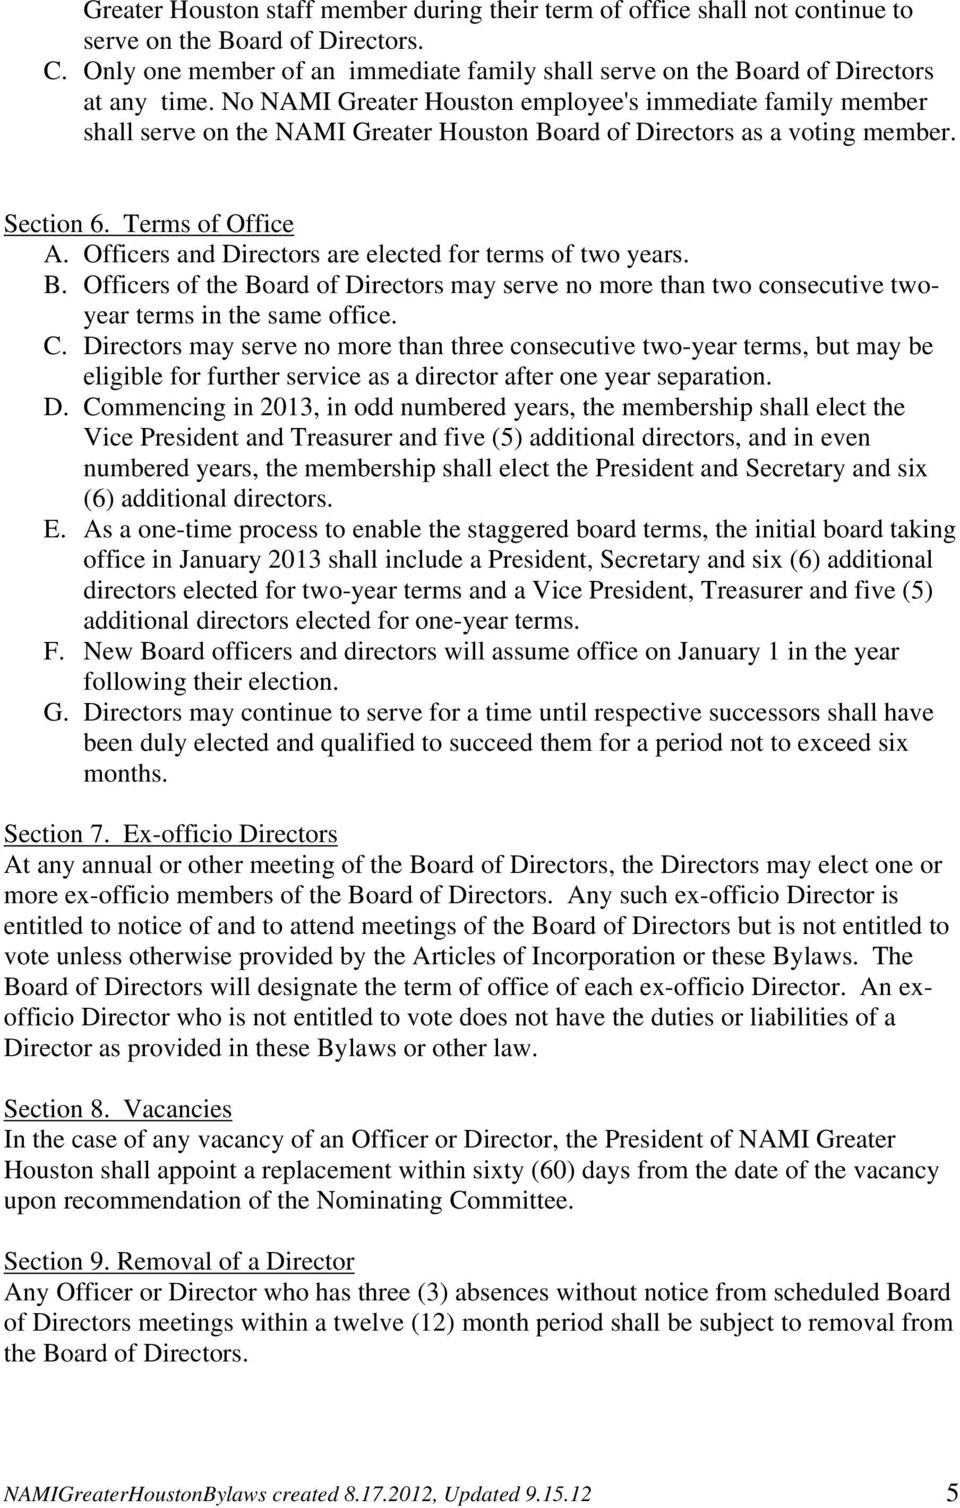 No NAMI Greater Houston employee's immediate family member shall serve on the NAMI Greater Houston Board of Directors as a voting member. Section 6. Terms of Office A.